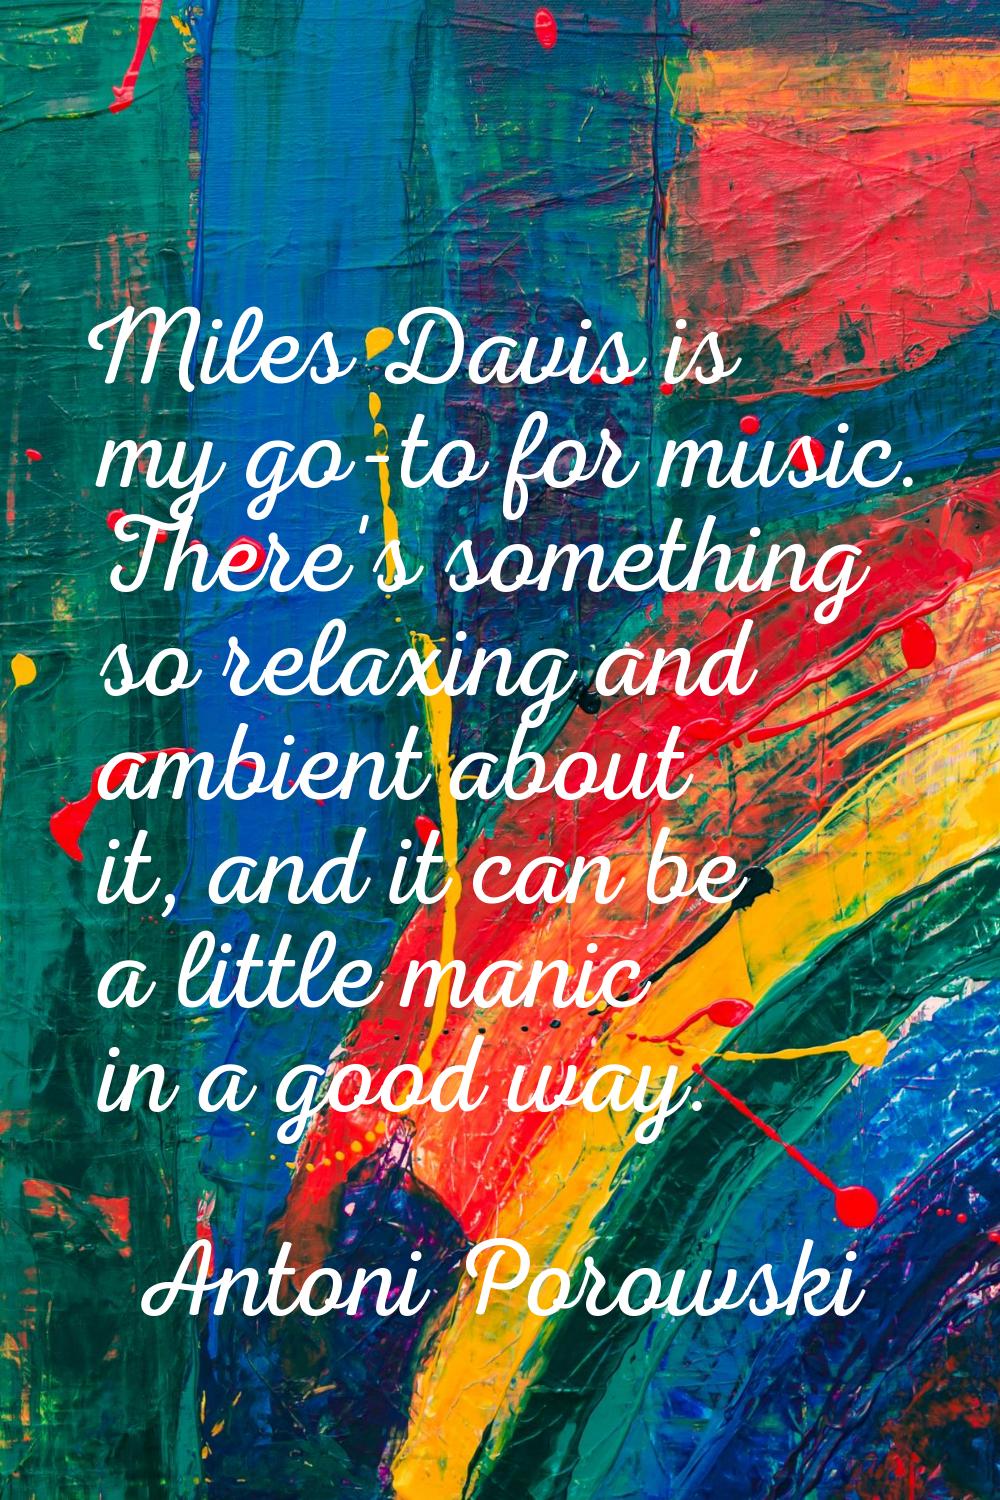 Miles Davis is my go-to for music. There's something so relaxing and ambient about it, and it can b